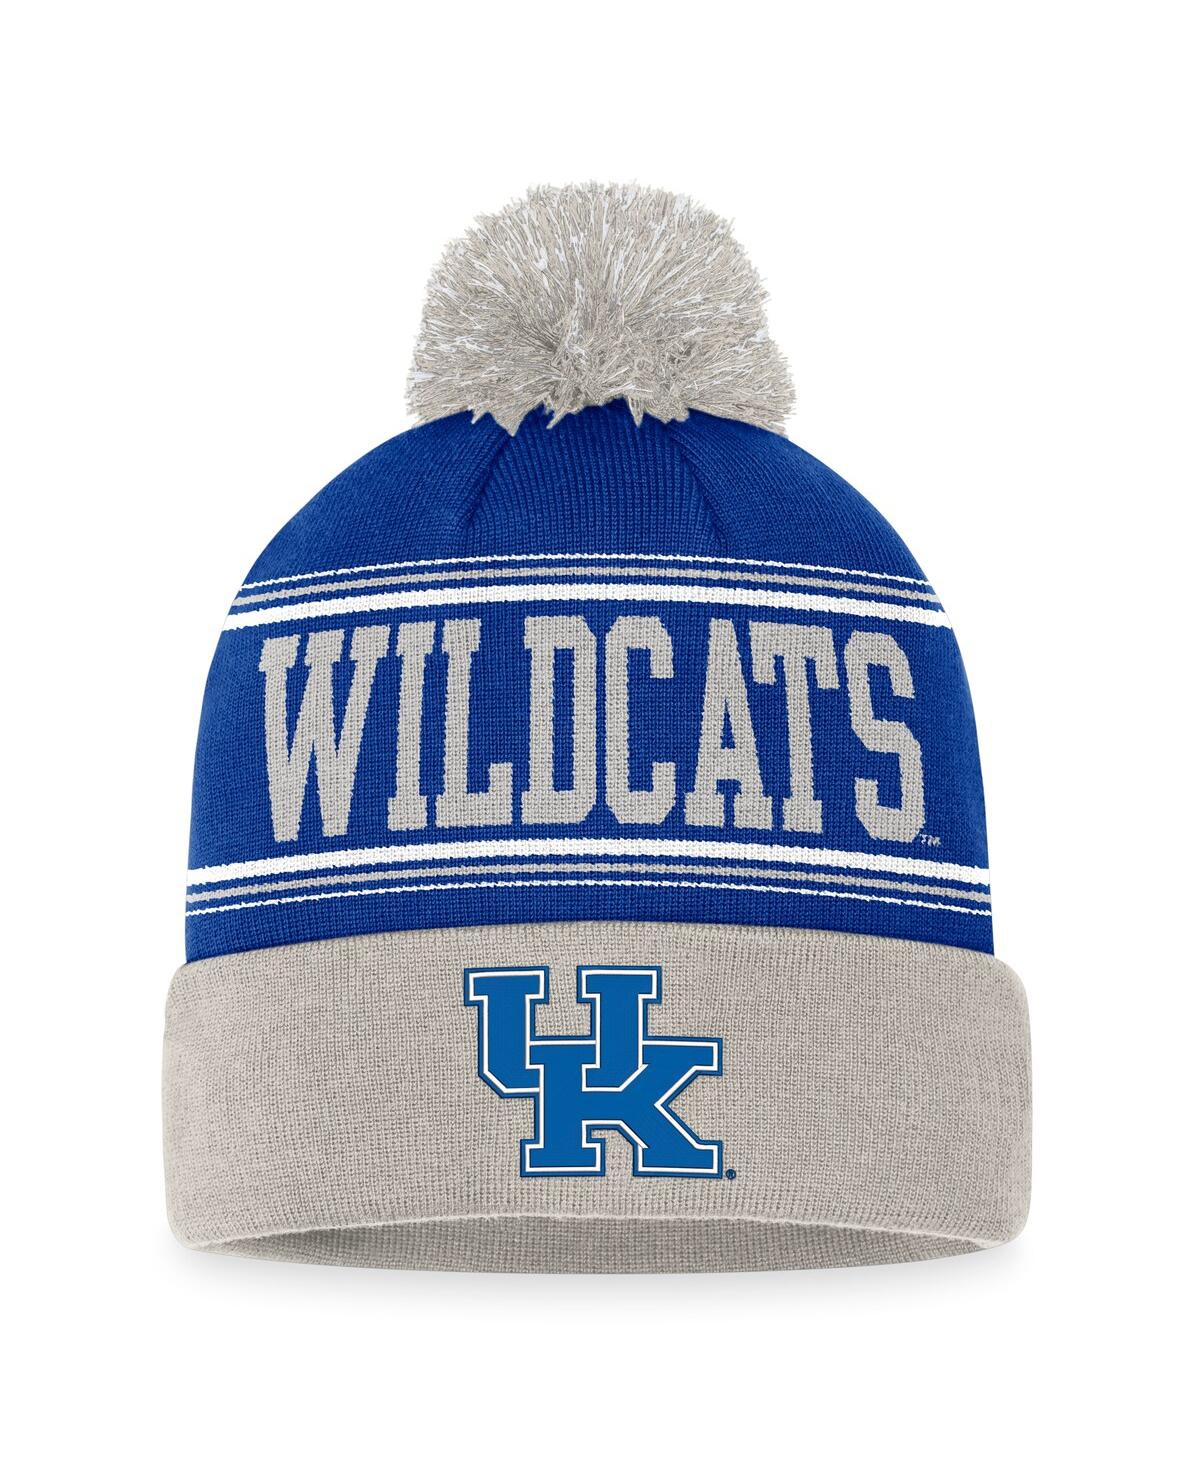 Top Of The World Men's  Royal Kentucky Wildcats Draft Cuffed Knit Hat With Pom